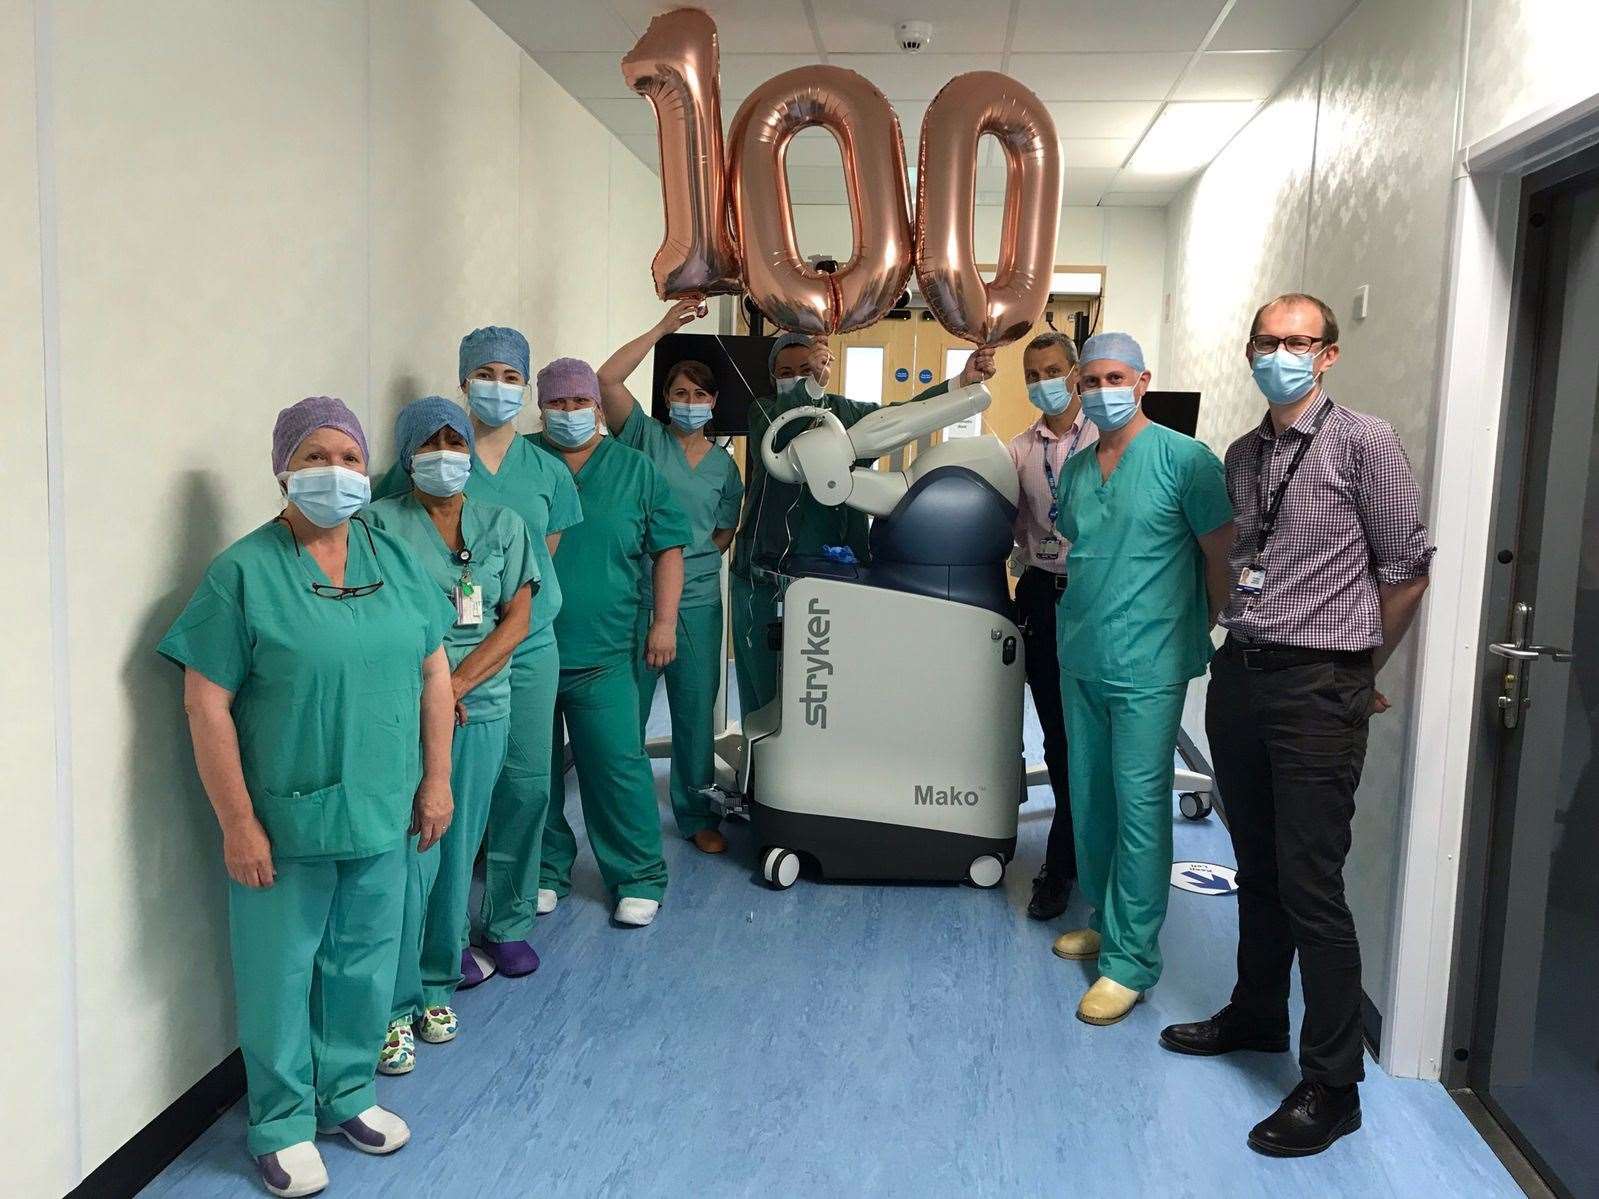 The Woodend Hospital theatre team marking 100 surgeries with the Mako robot.